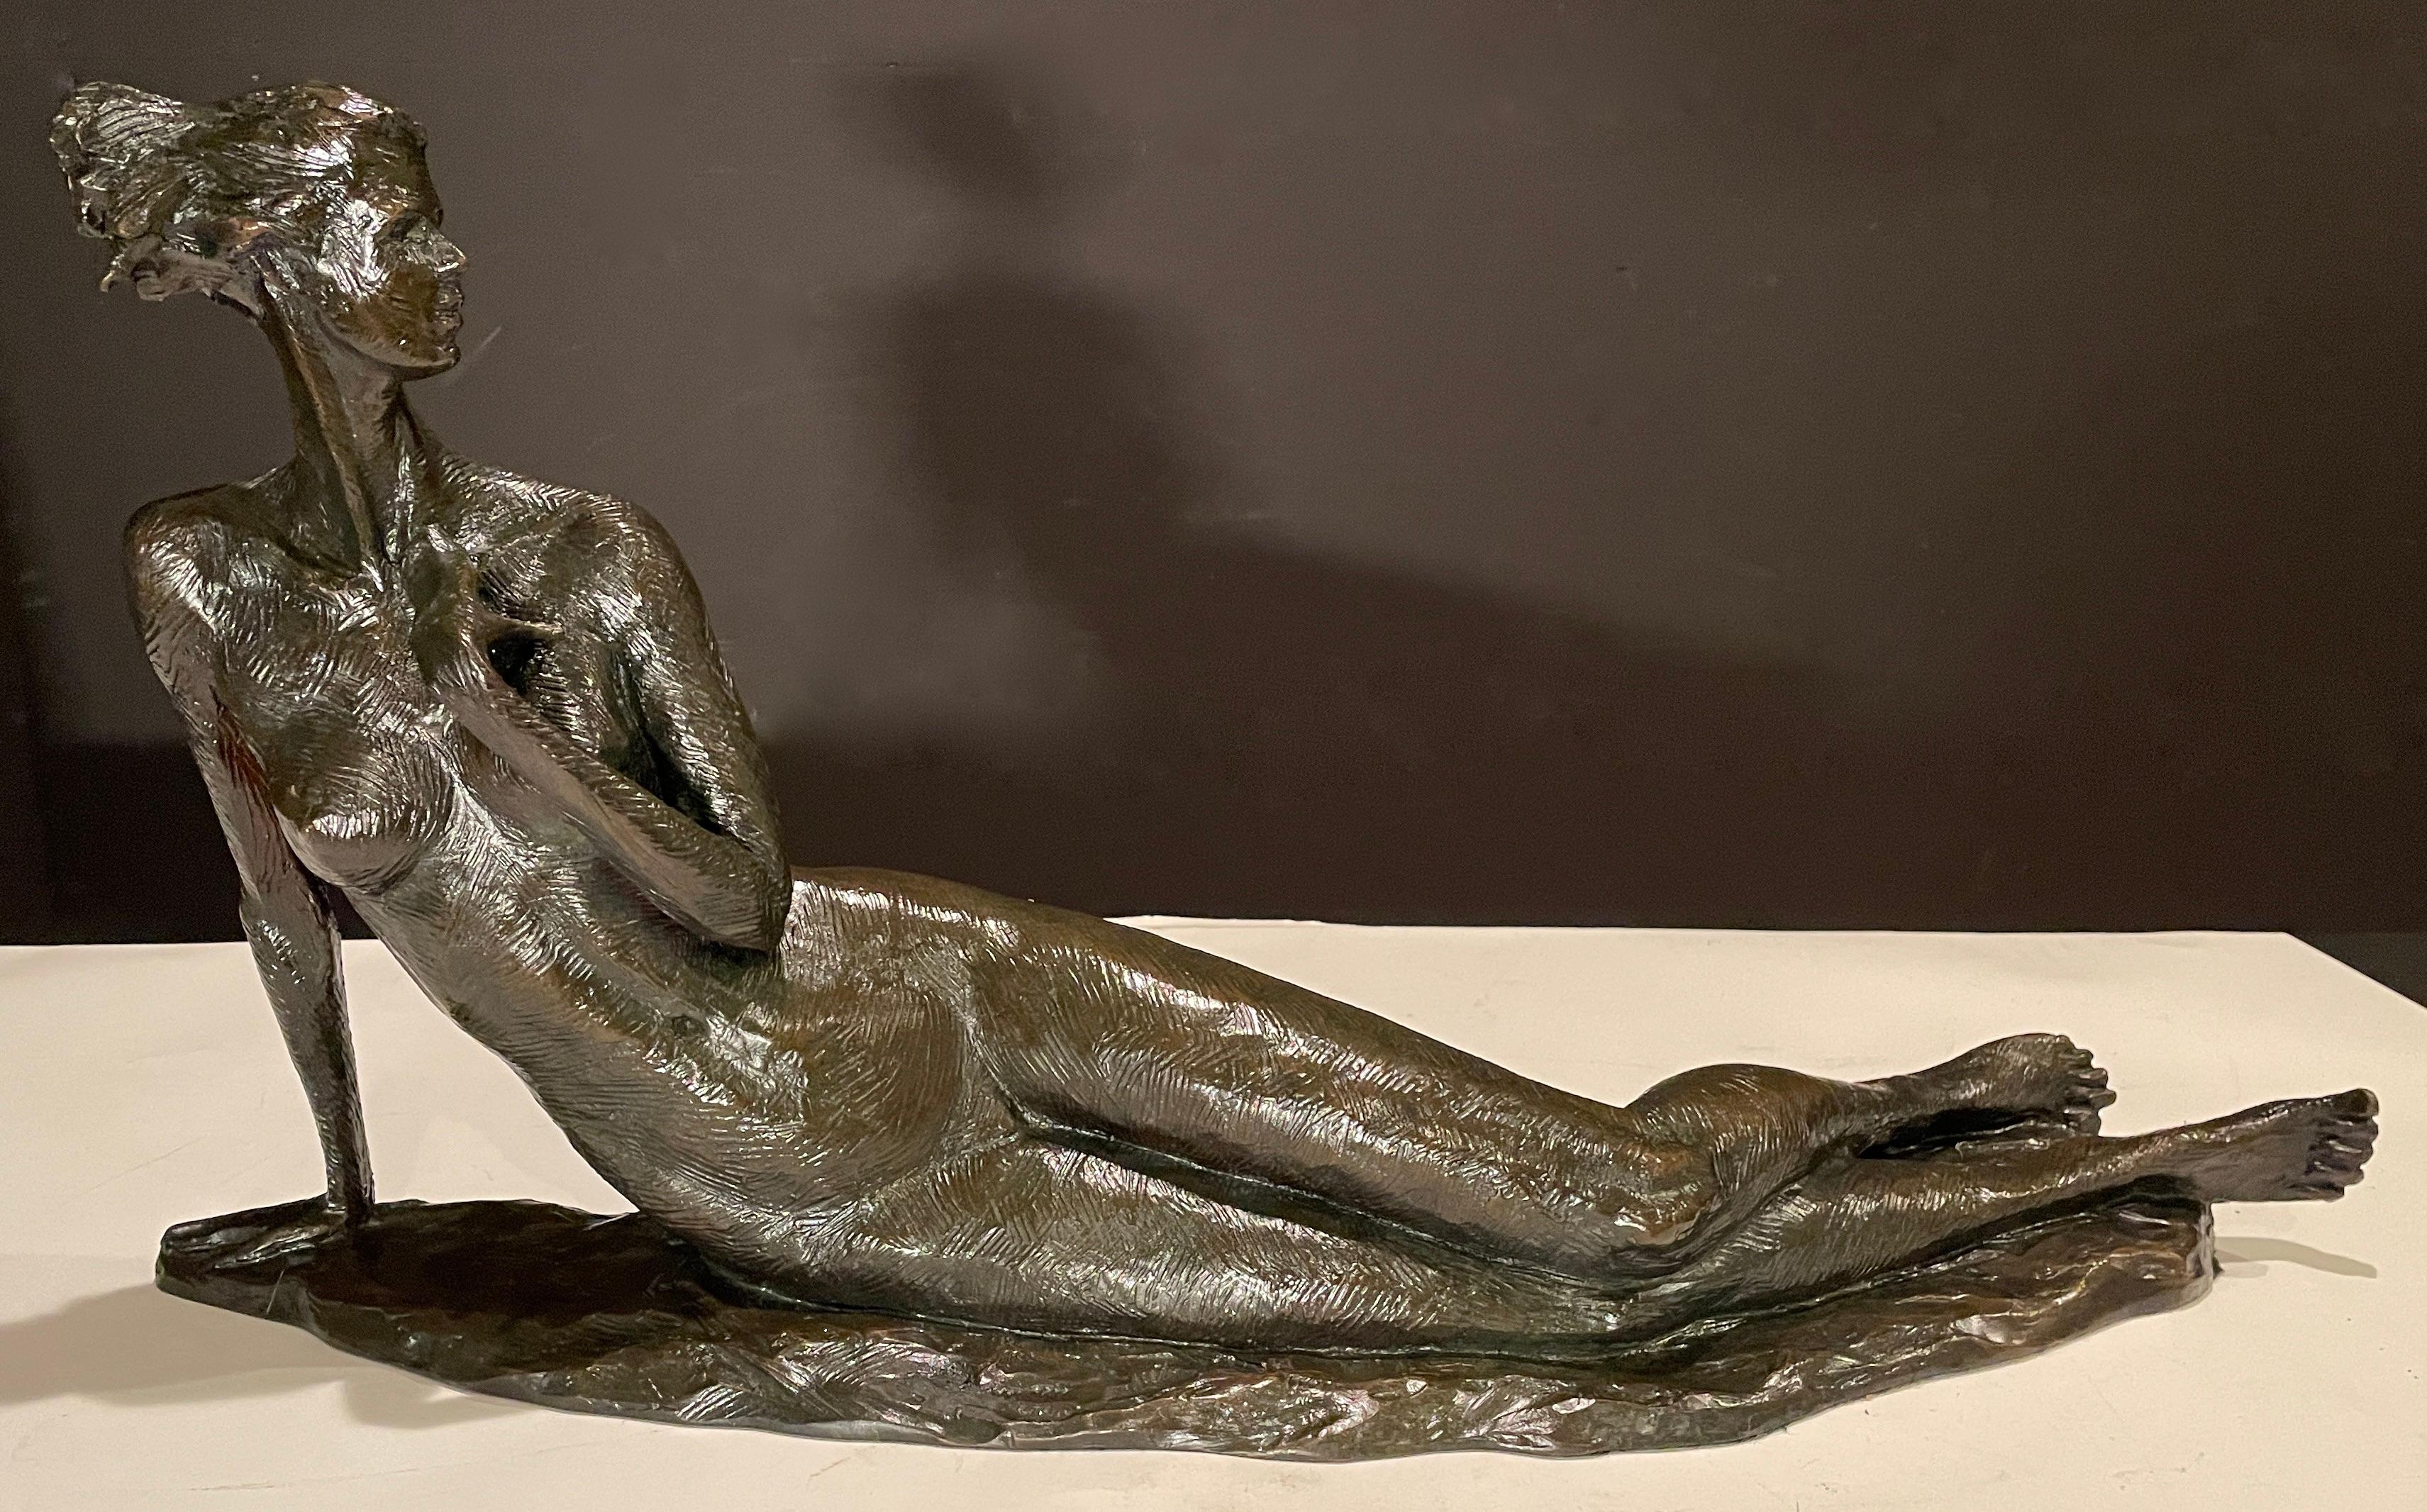 Fine quality highly stylized female nude bronze sculpture by Tom Corbin (American, b. 1954). Signed dated and numbered. Beautiful patina.
Artist: Tom Corbin
Numbered Edition: 41/75
Date: 2000.